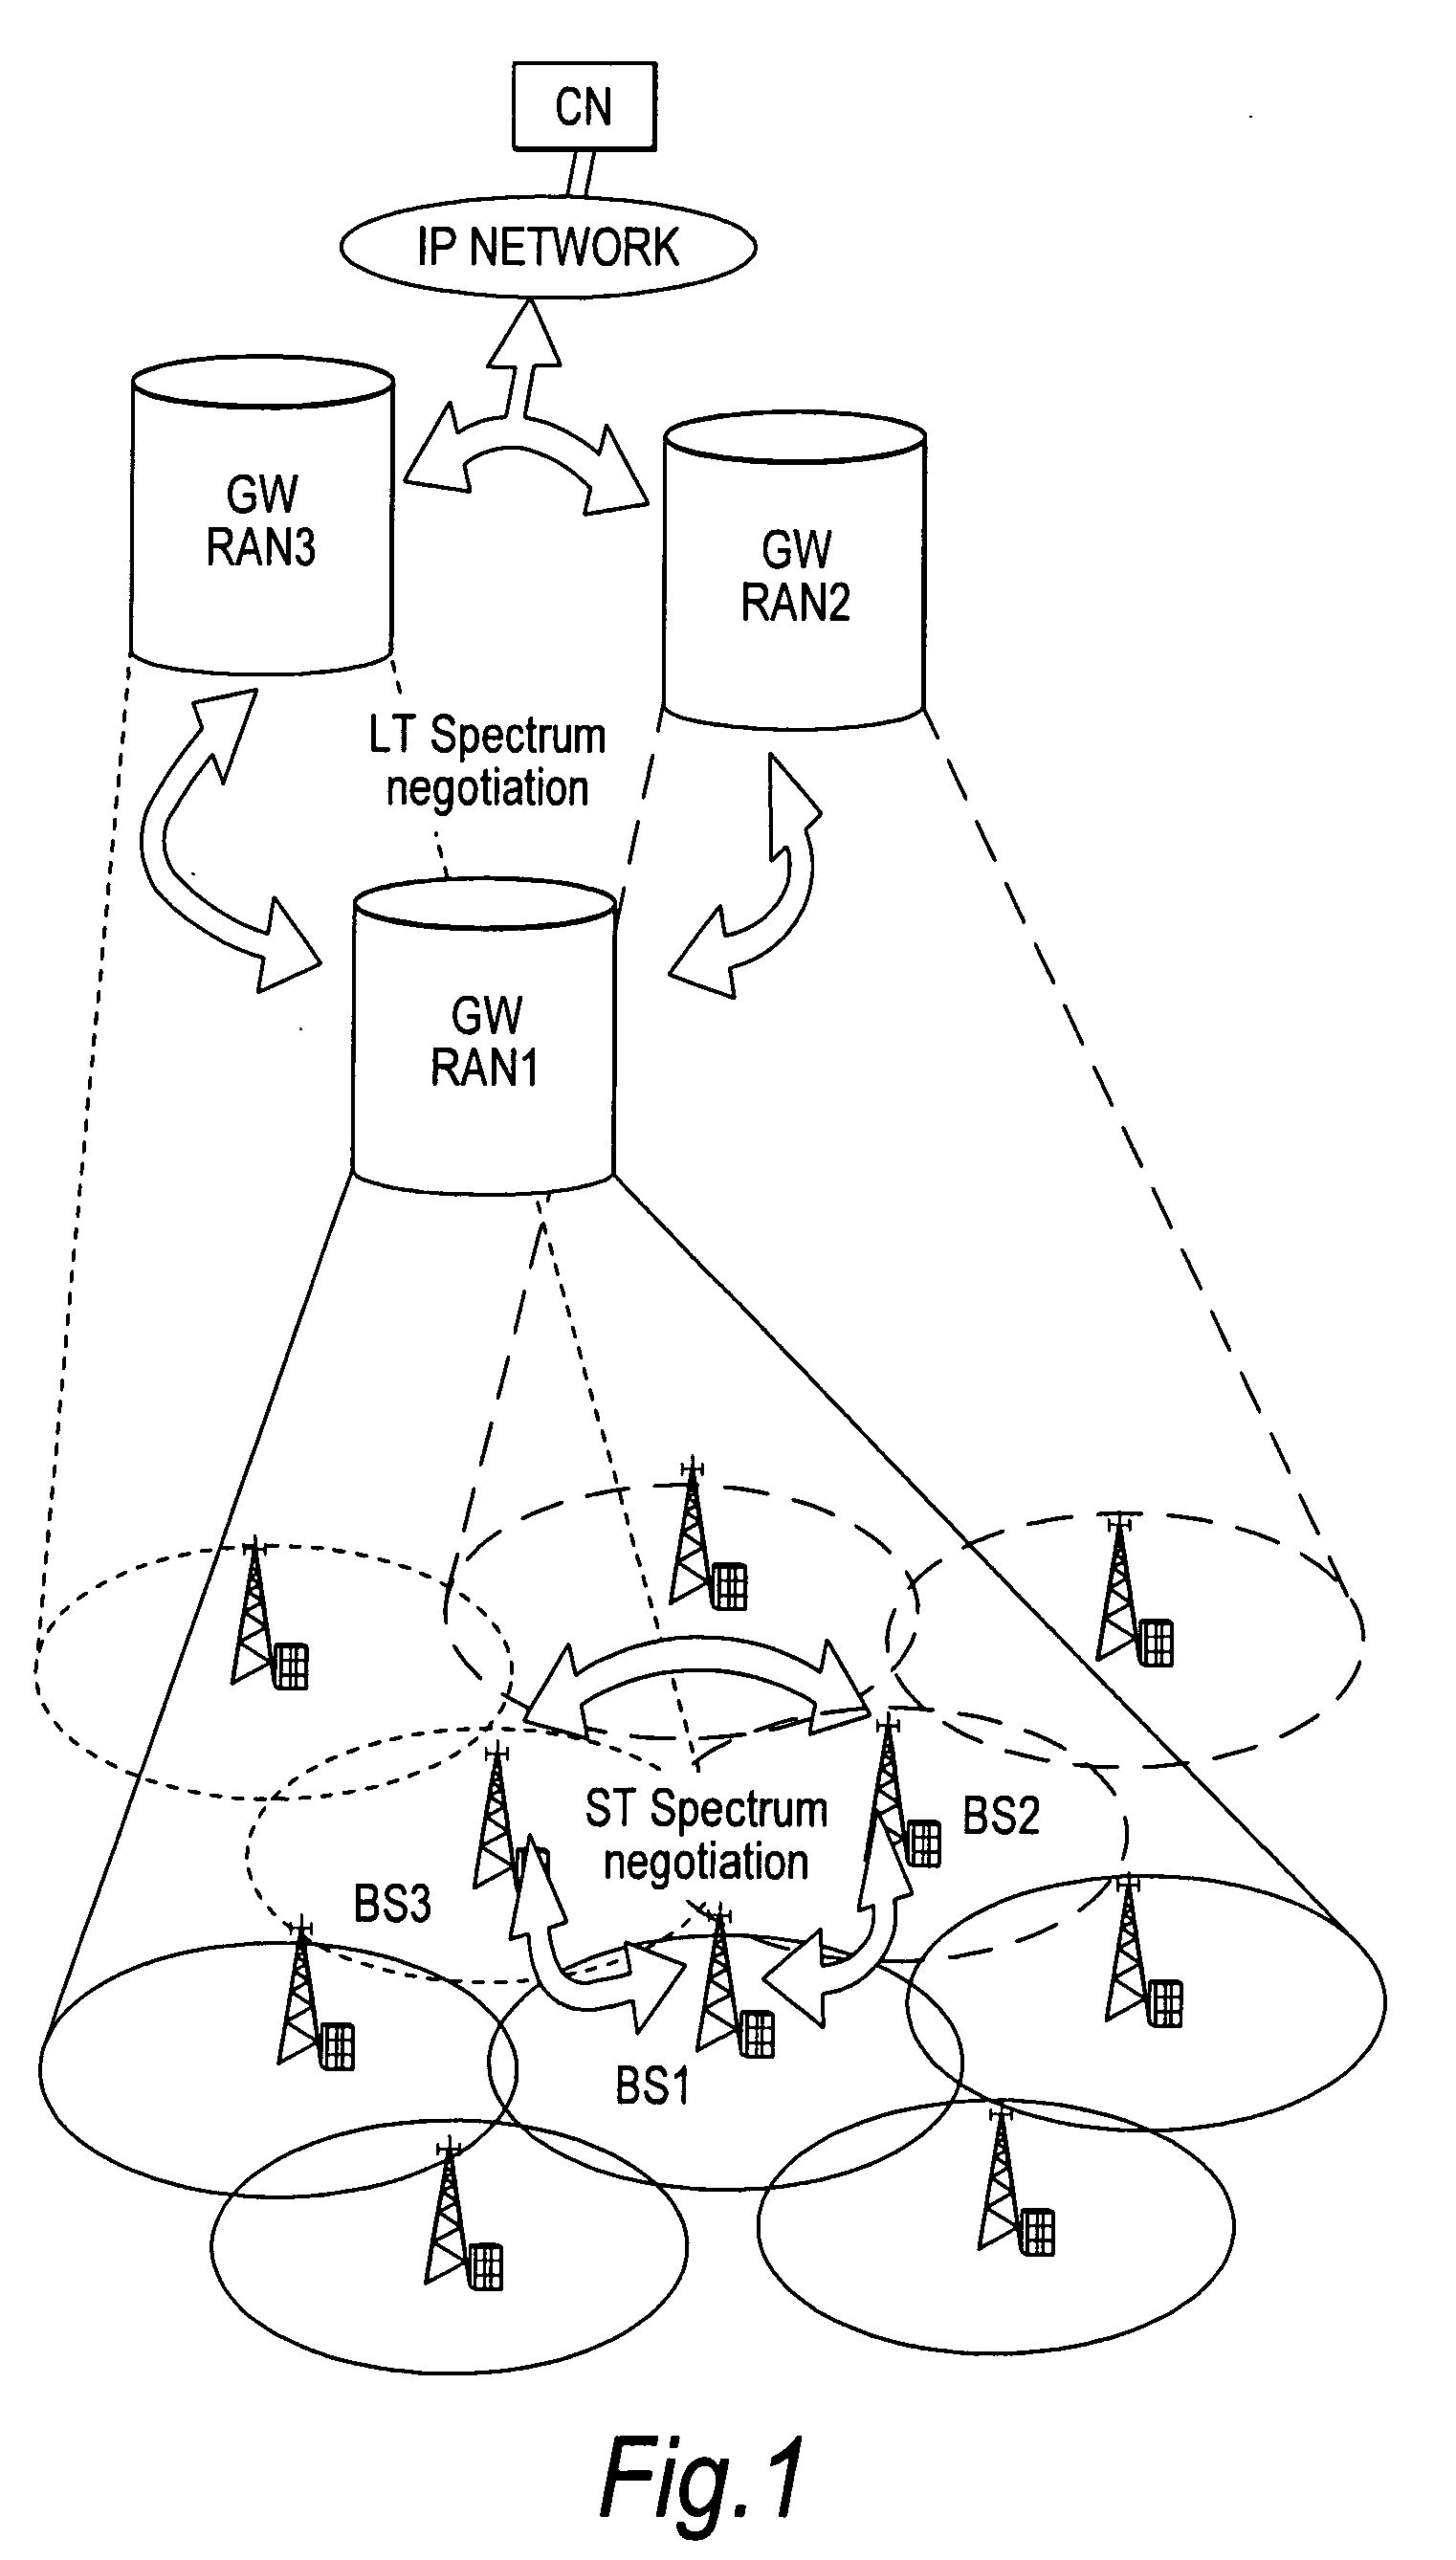 Communication systems